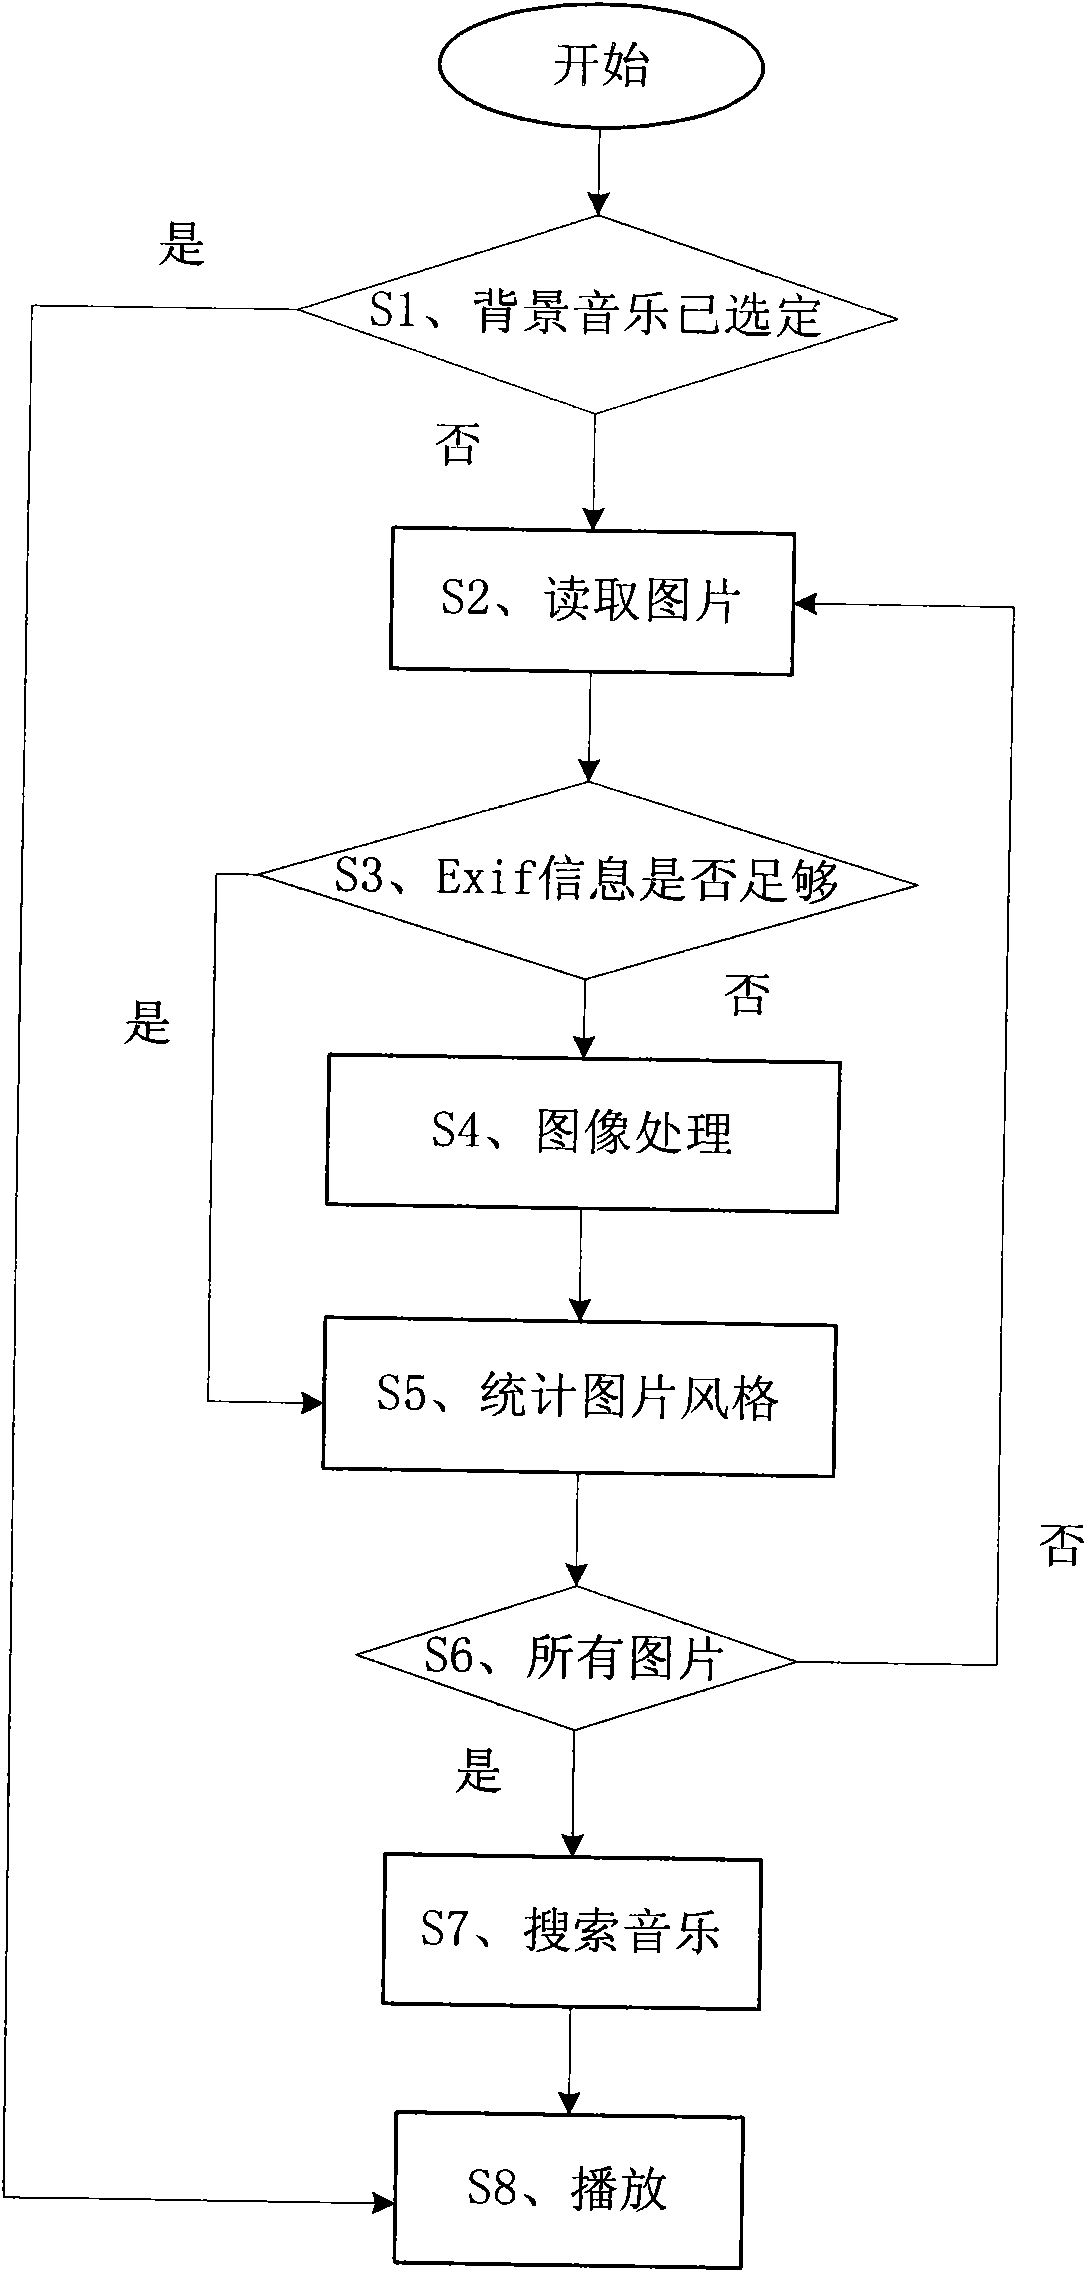 Photo album showing system capable of matching background music and background matching method thereof